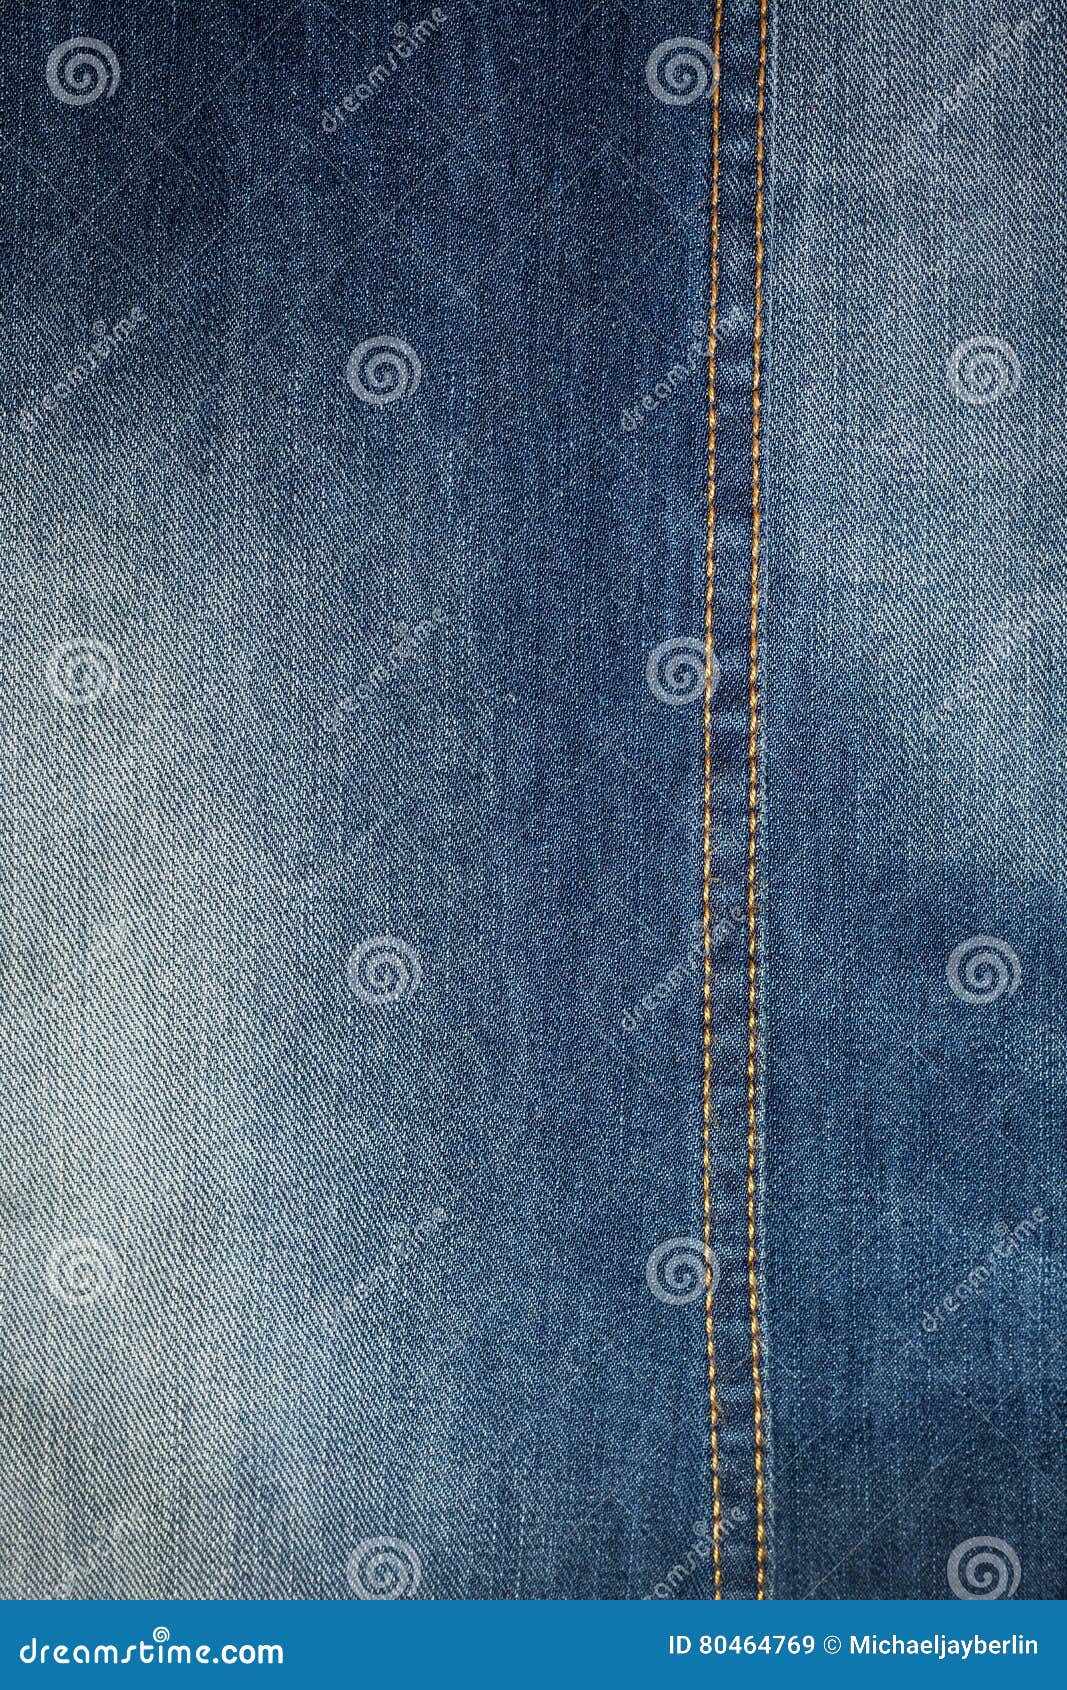 Textile - Fabric Series: Jeans Stitches Stock Image - Image of blue ...